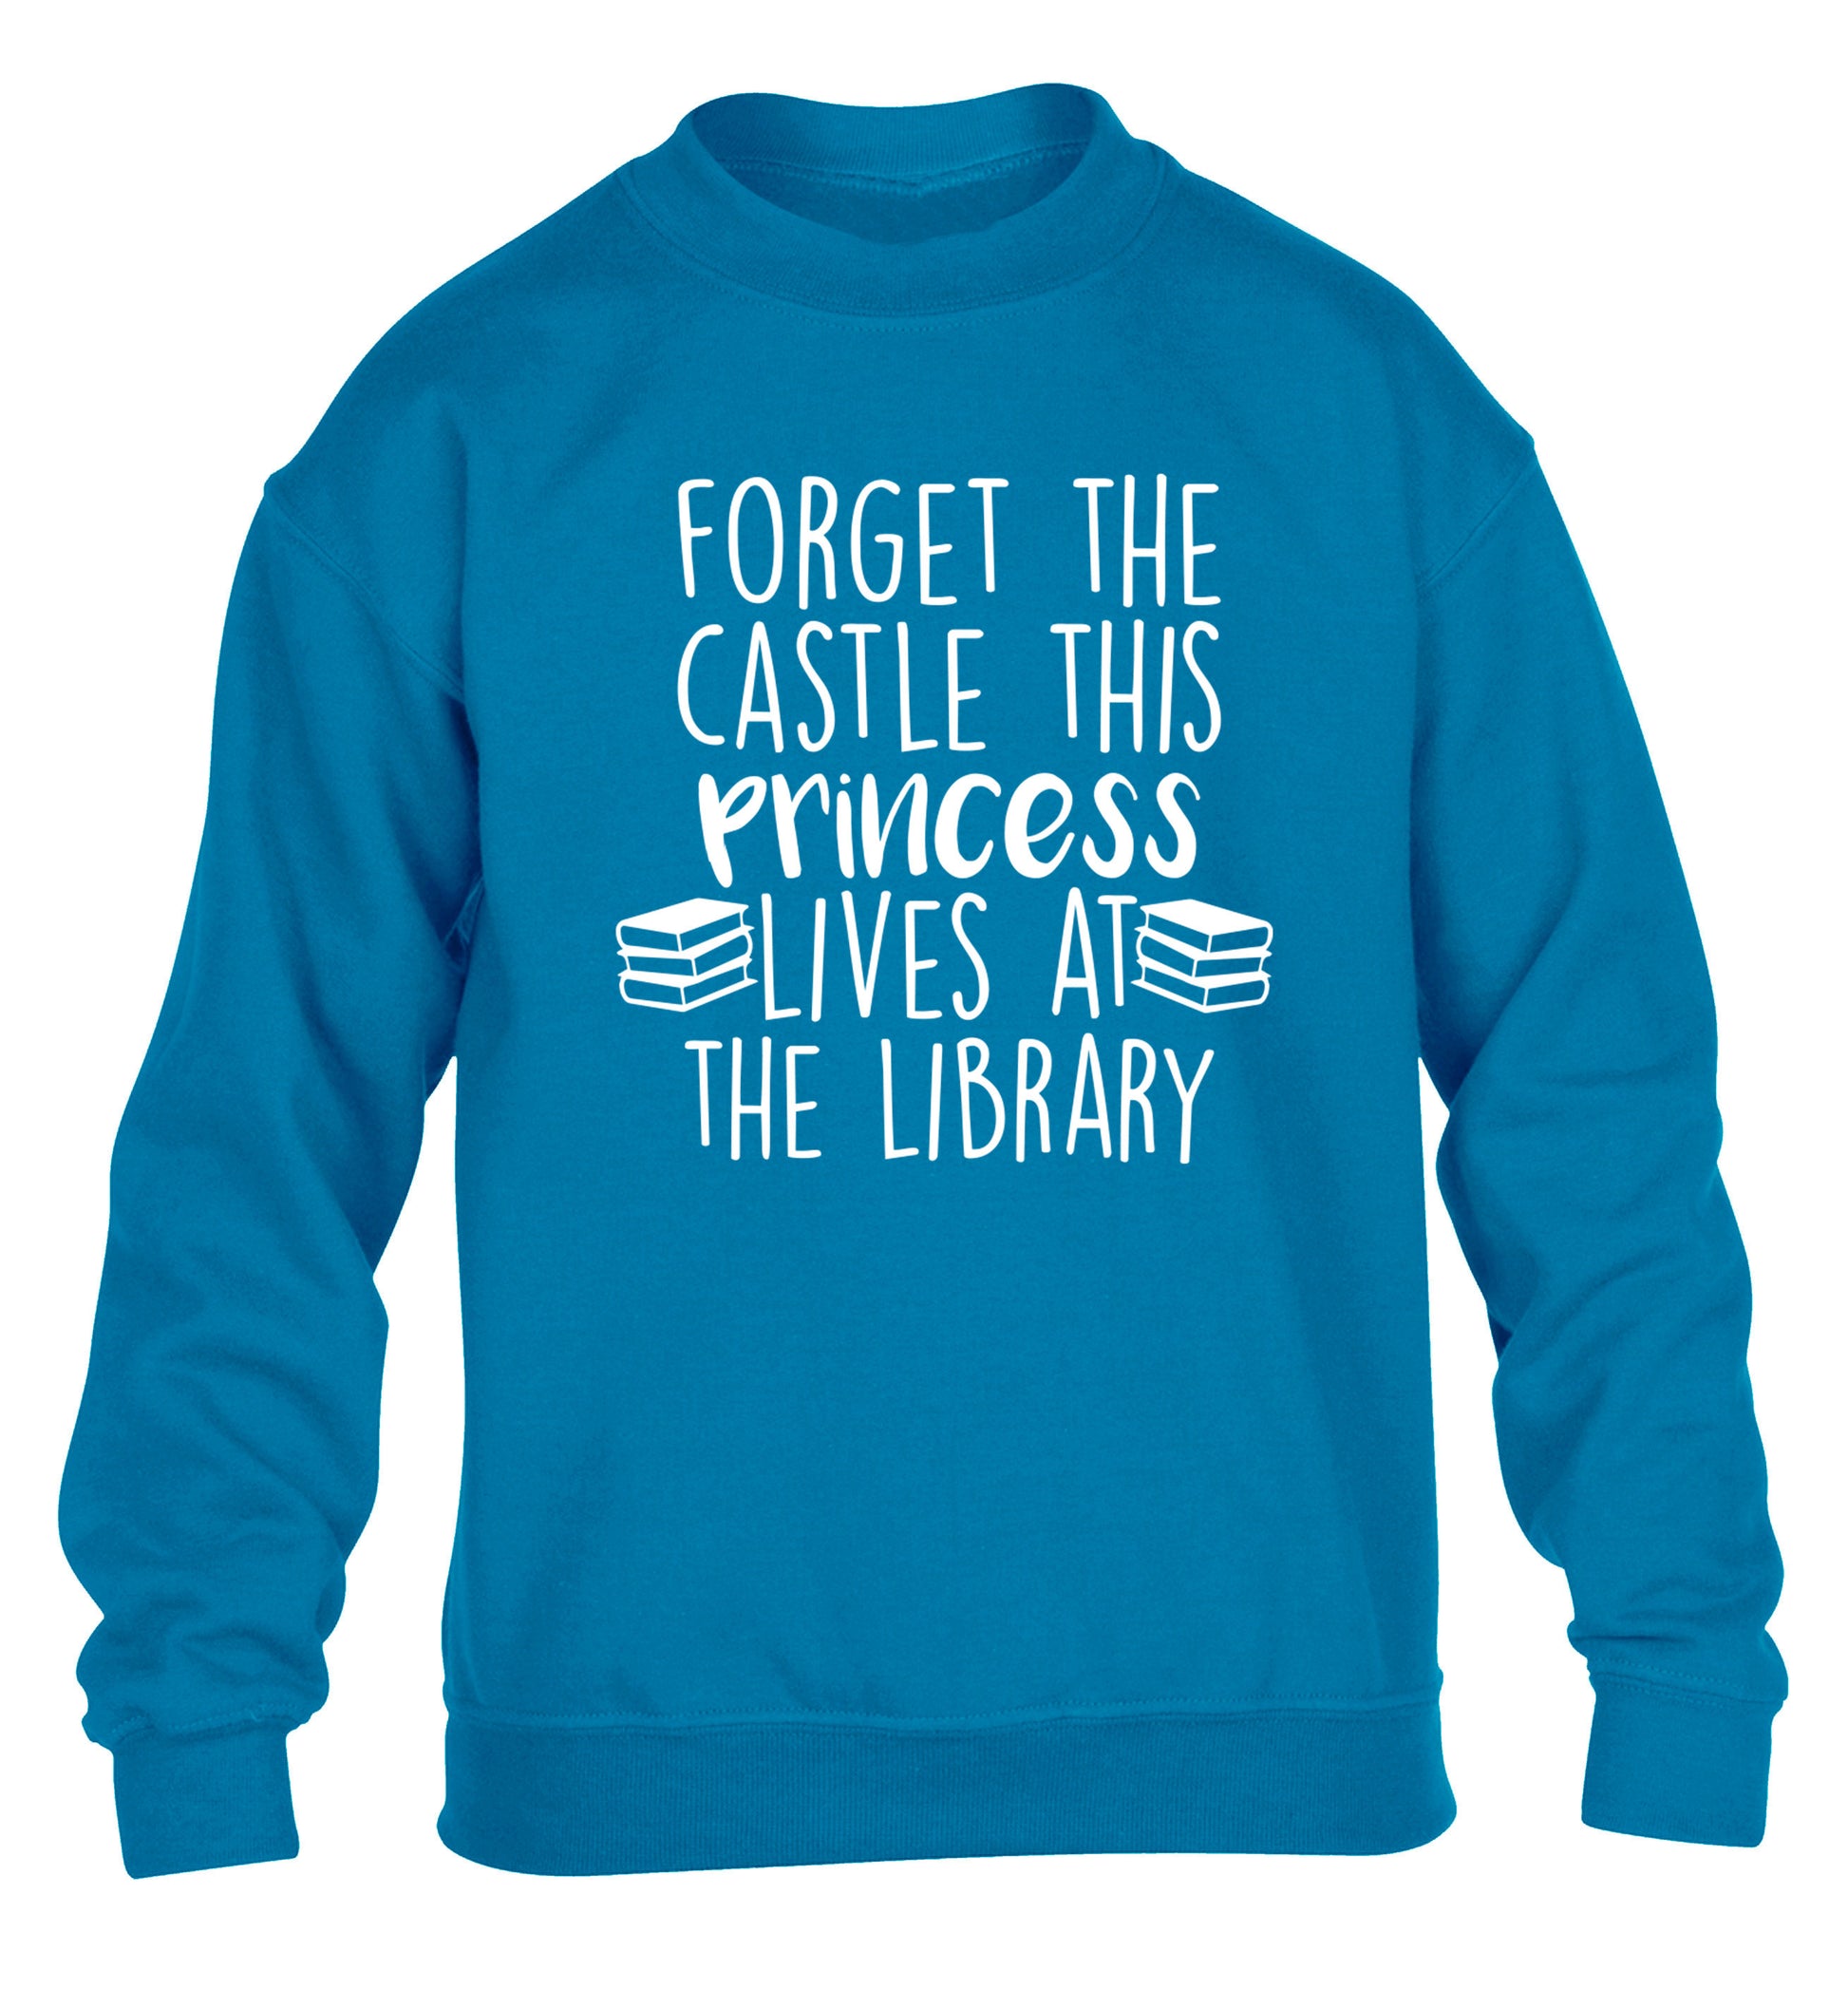 Forget the castle this princess lives at the library children's blue sweater 12-14 Years